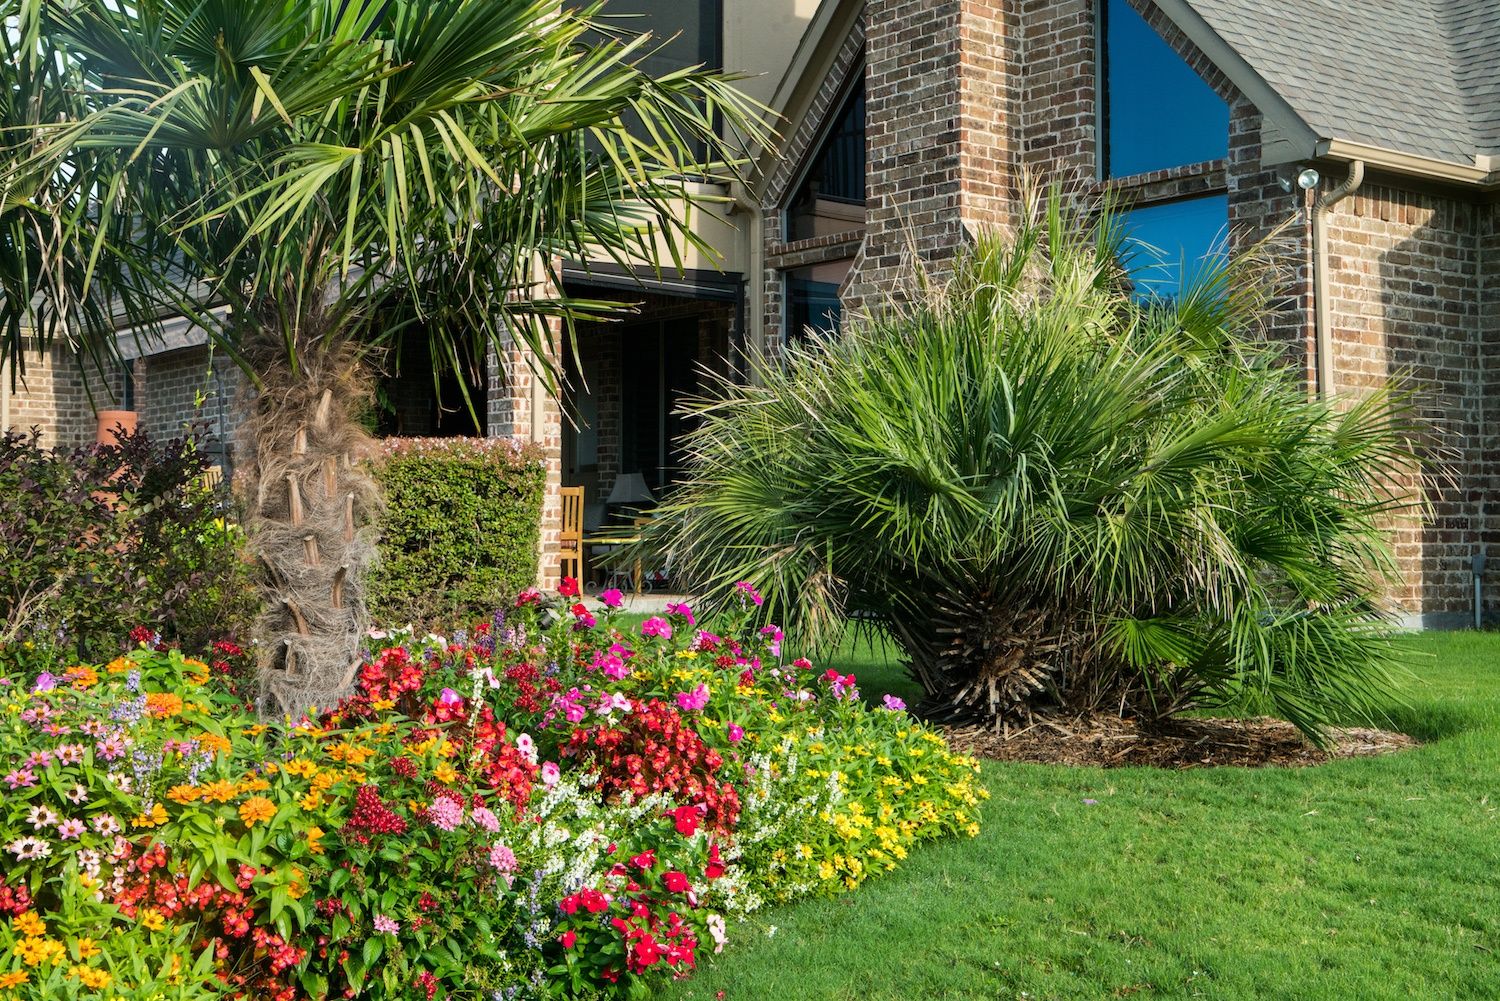 5 of the Best Landscaping Companies for Flower Mound & Highland Village, TX (An Honest Review)